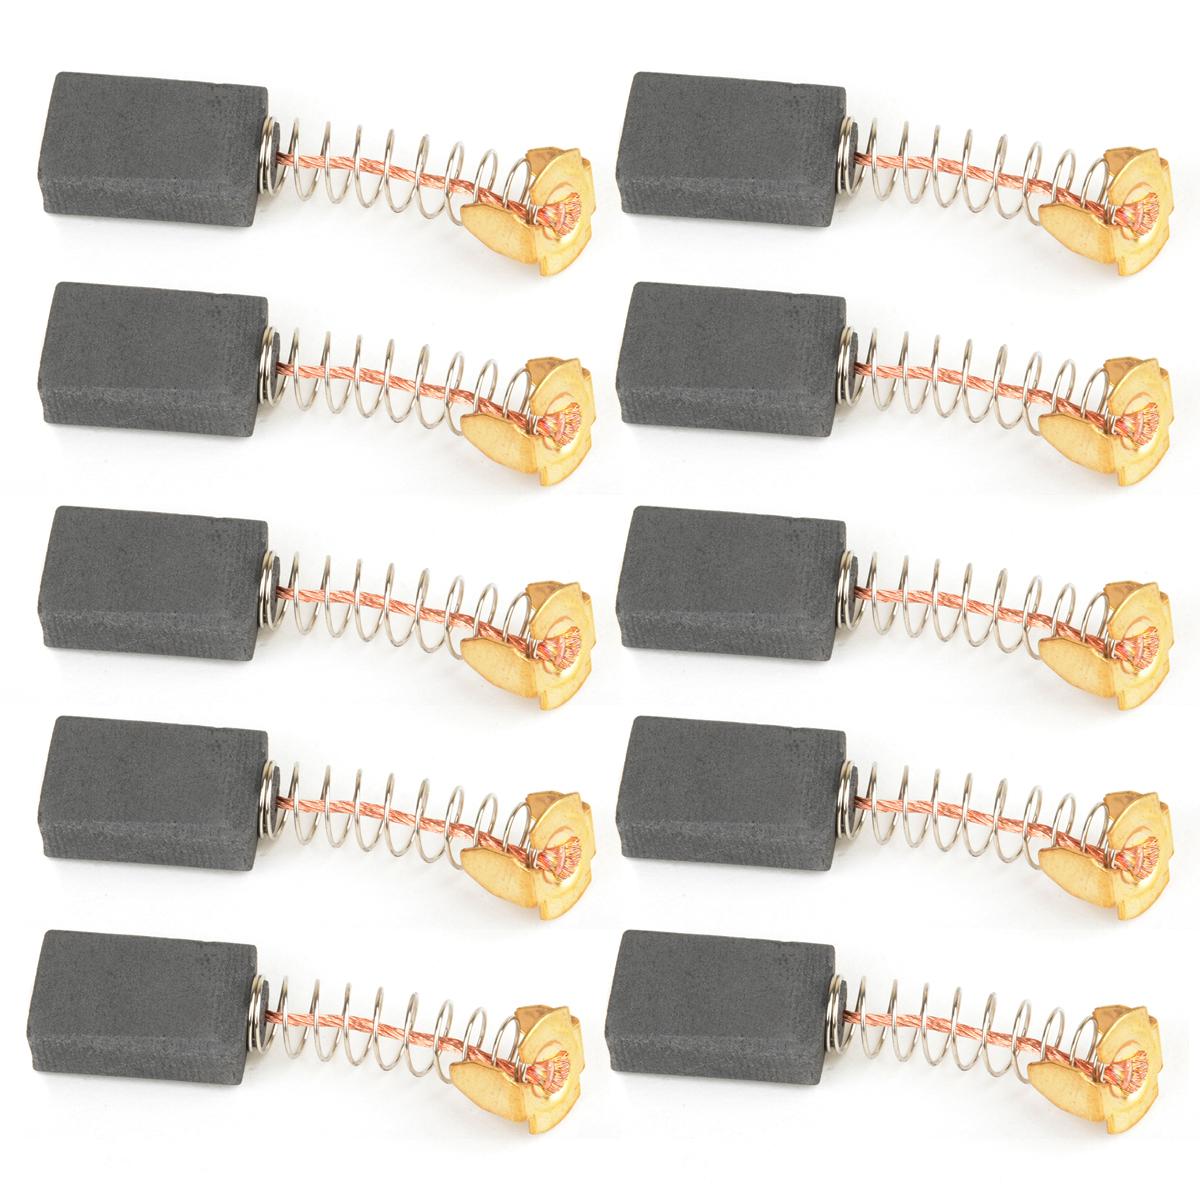 10pcs 4mm x 8mm x 20mm Carbon Brushes for Generic Electric Motor 